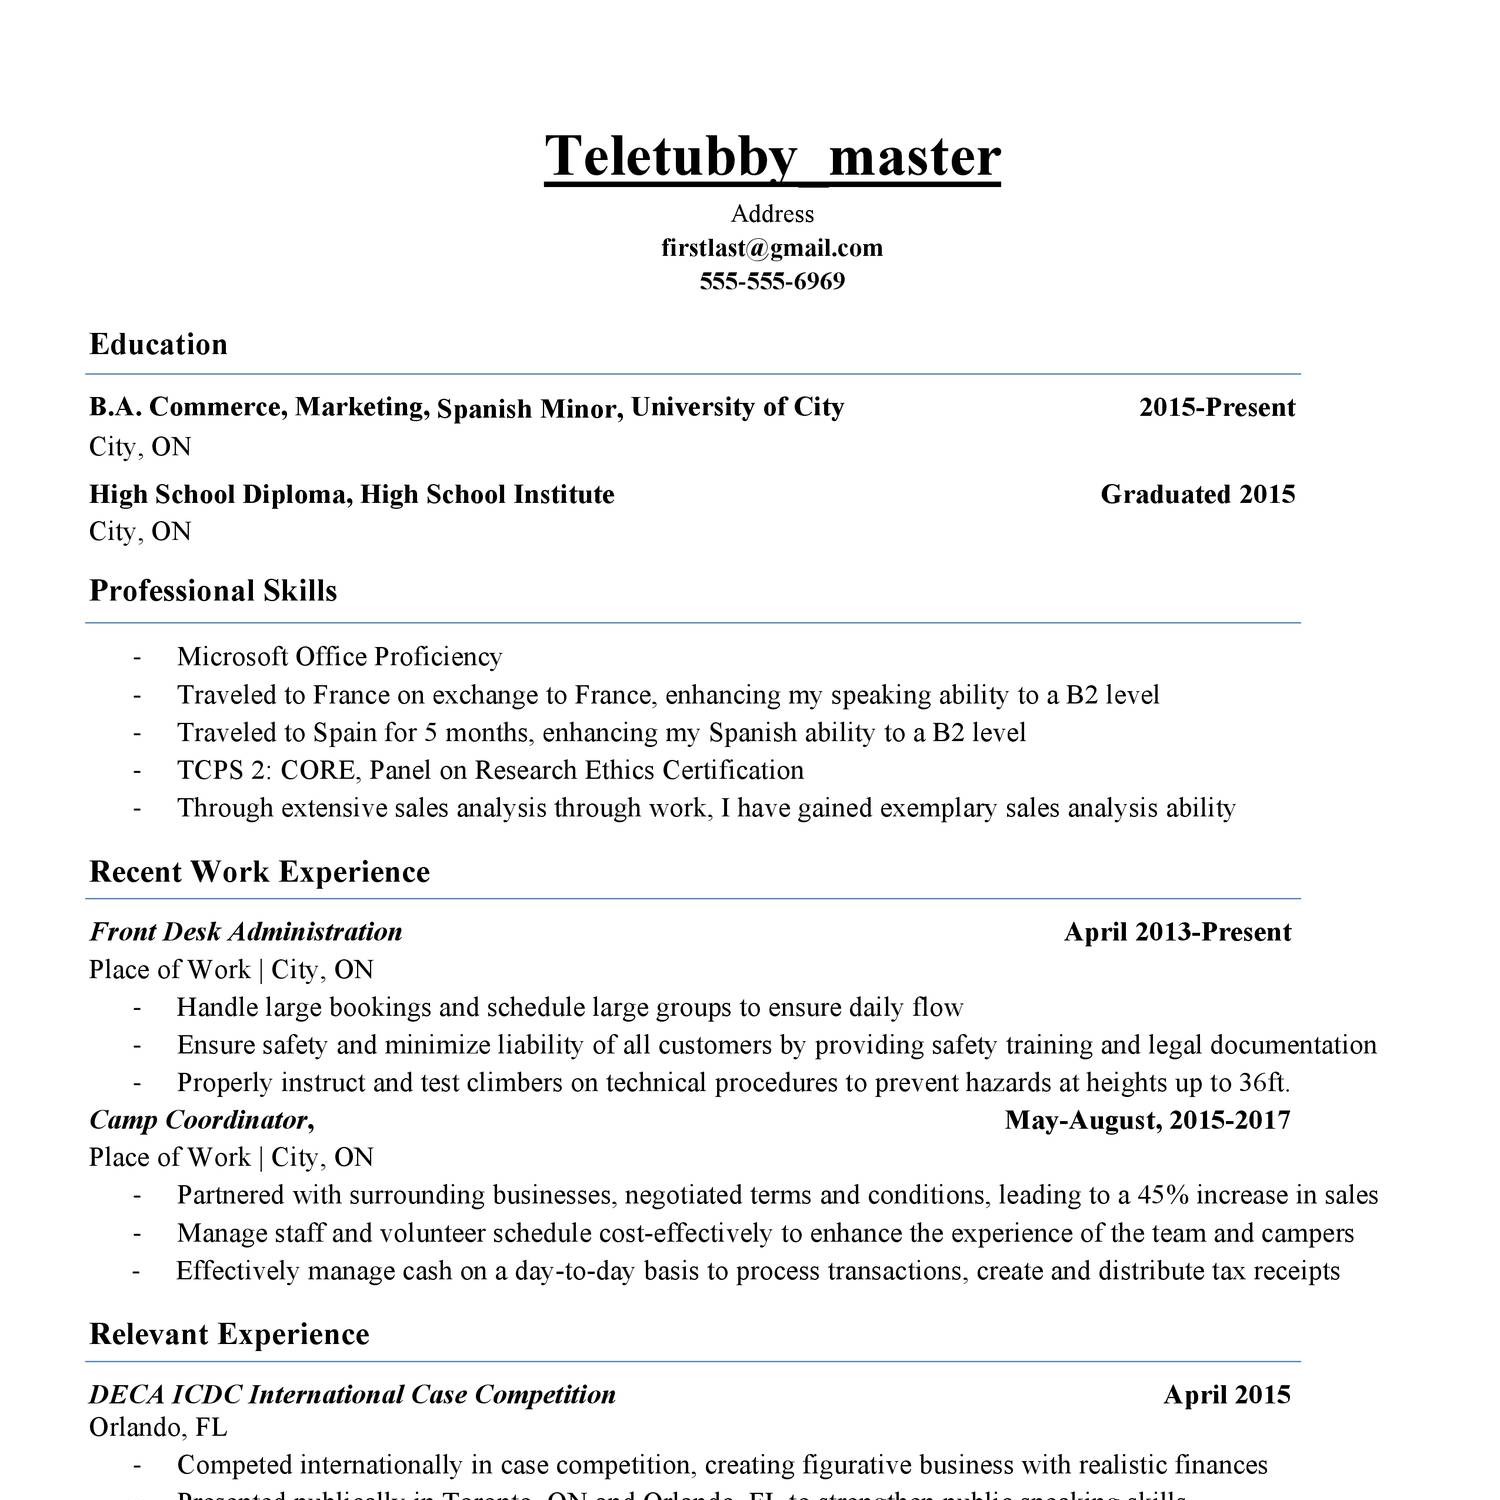 resume 2018 template free download